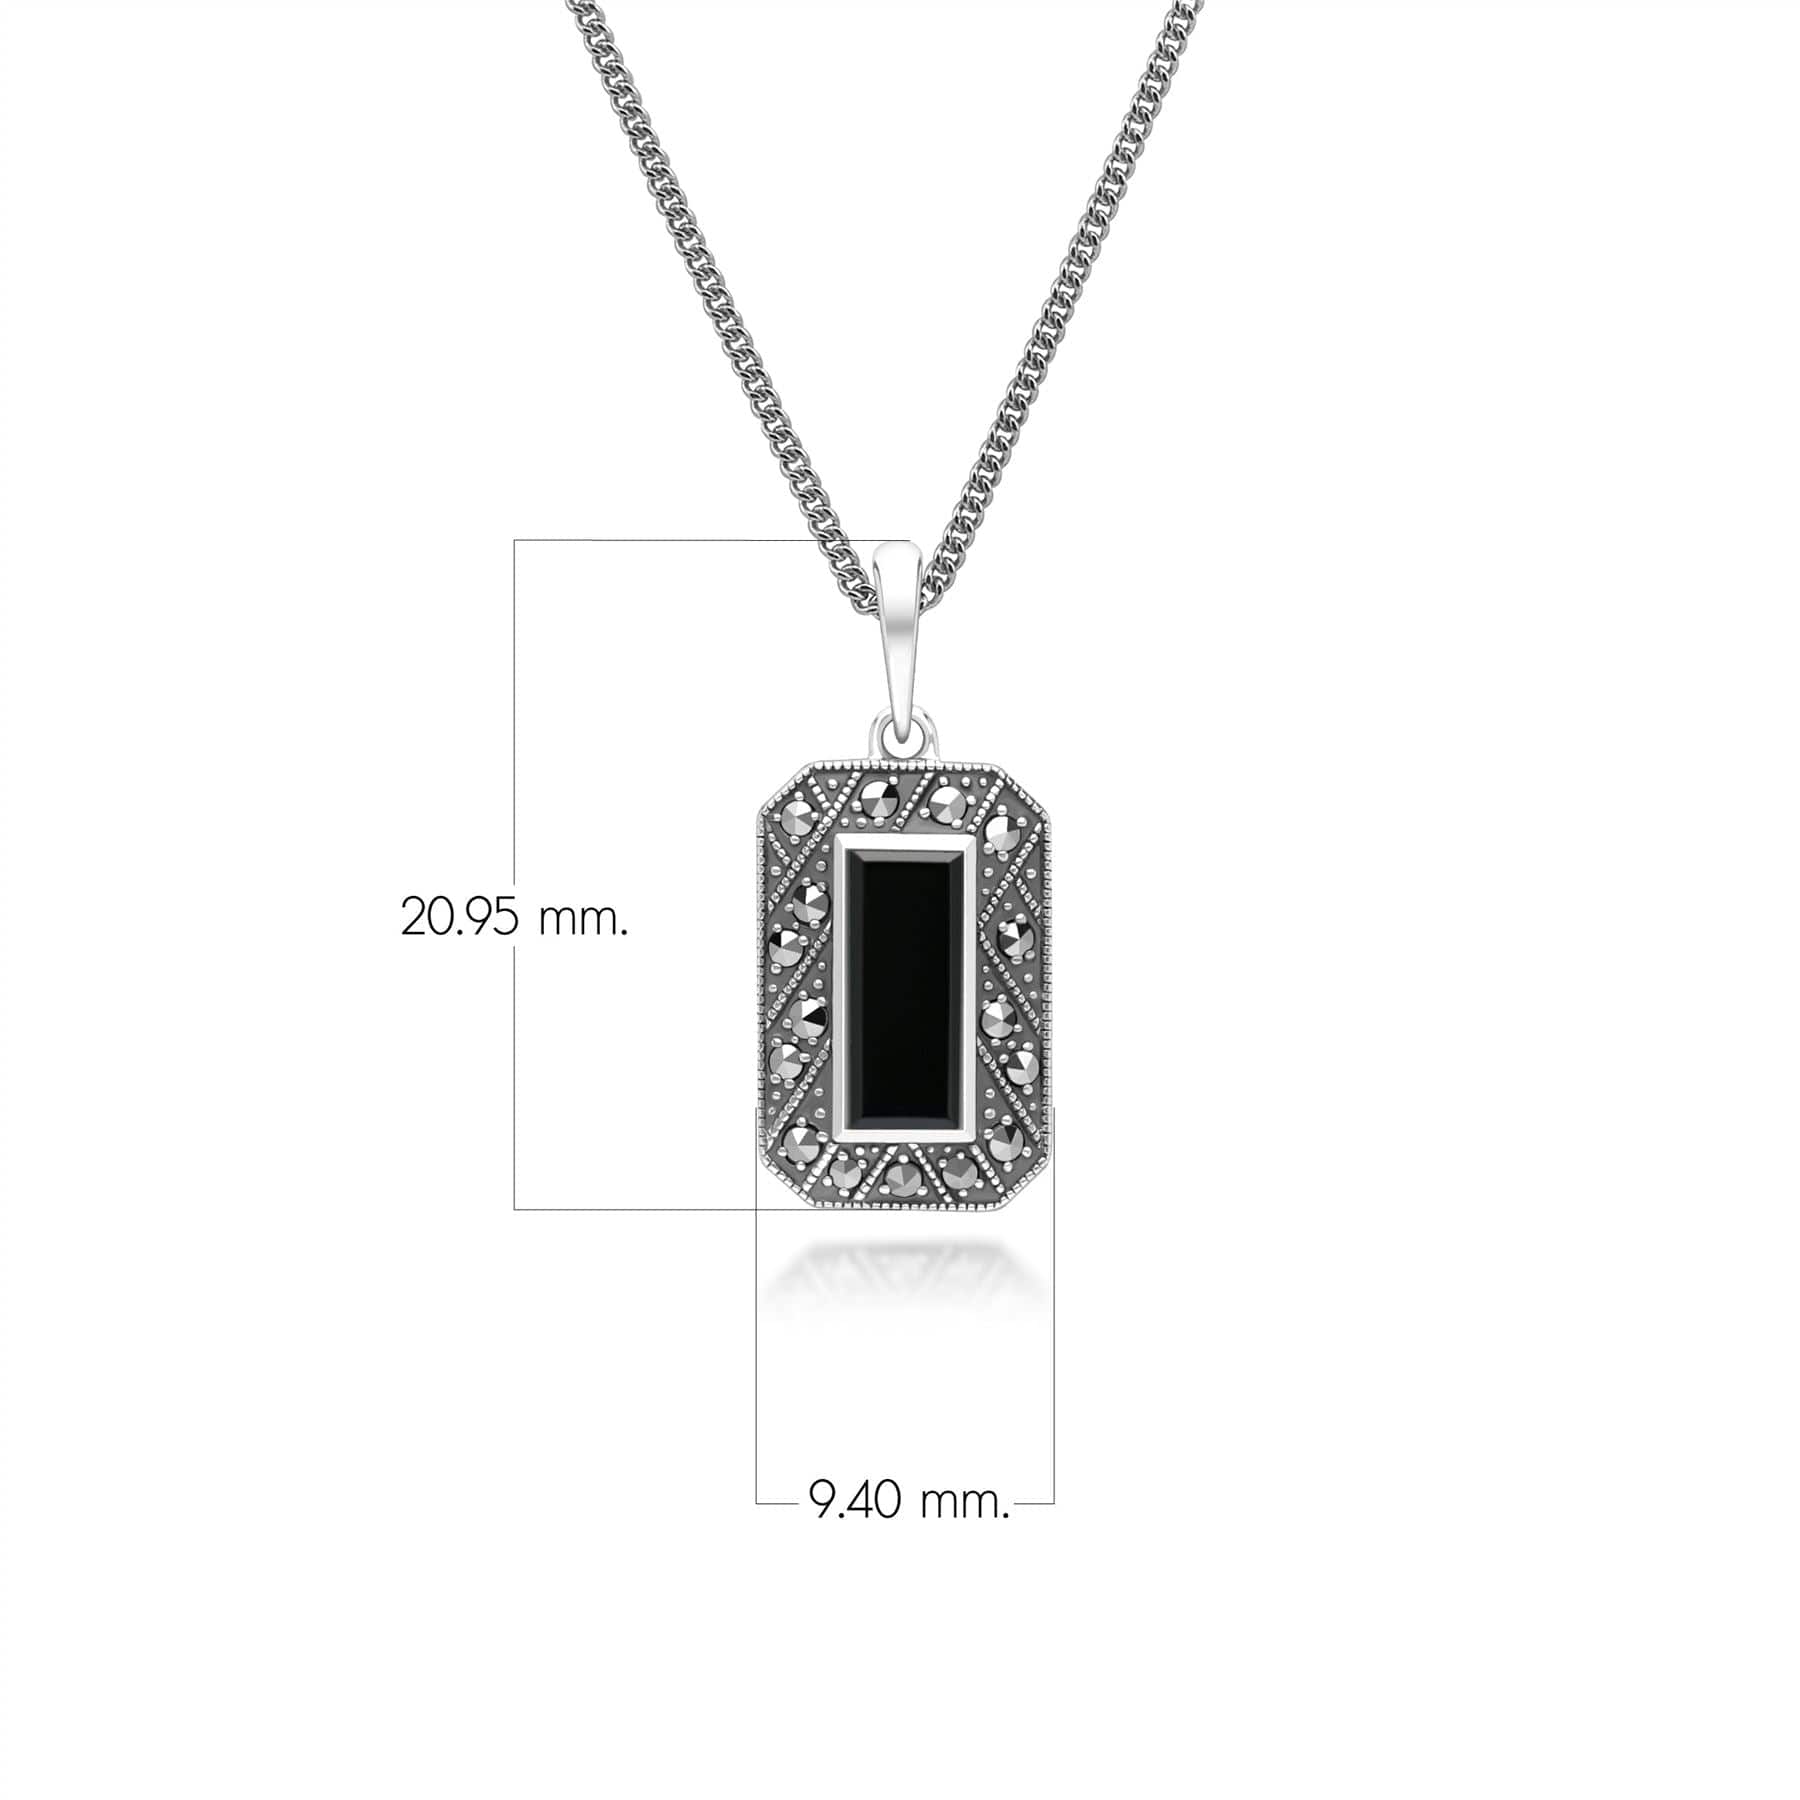 Art Deco Style Rectangle Onyx and Marcasite Pendant Necklace in Sterling Silver 214P334002925 Dimensions